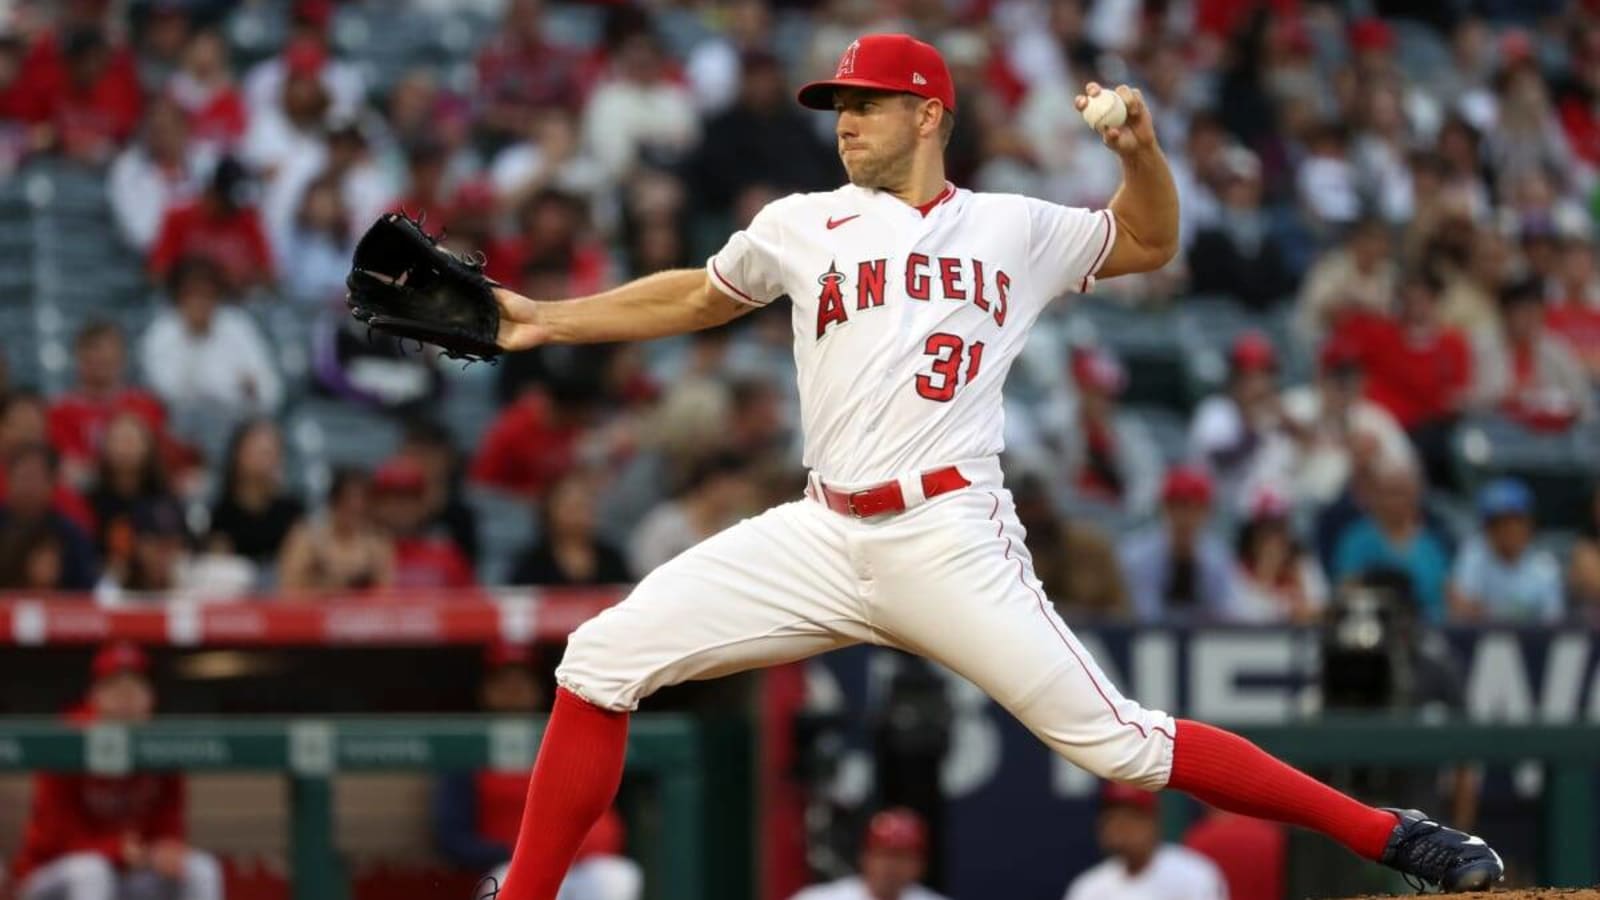 MLB Insider Lists Angels LHP Tyler Anderson as Potential Trade Candidate This Offseason